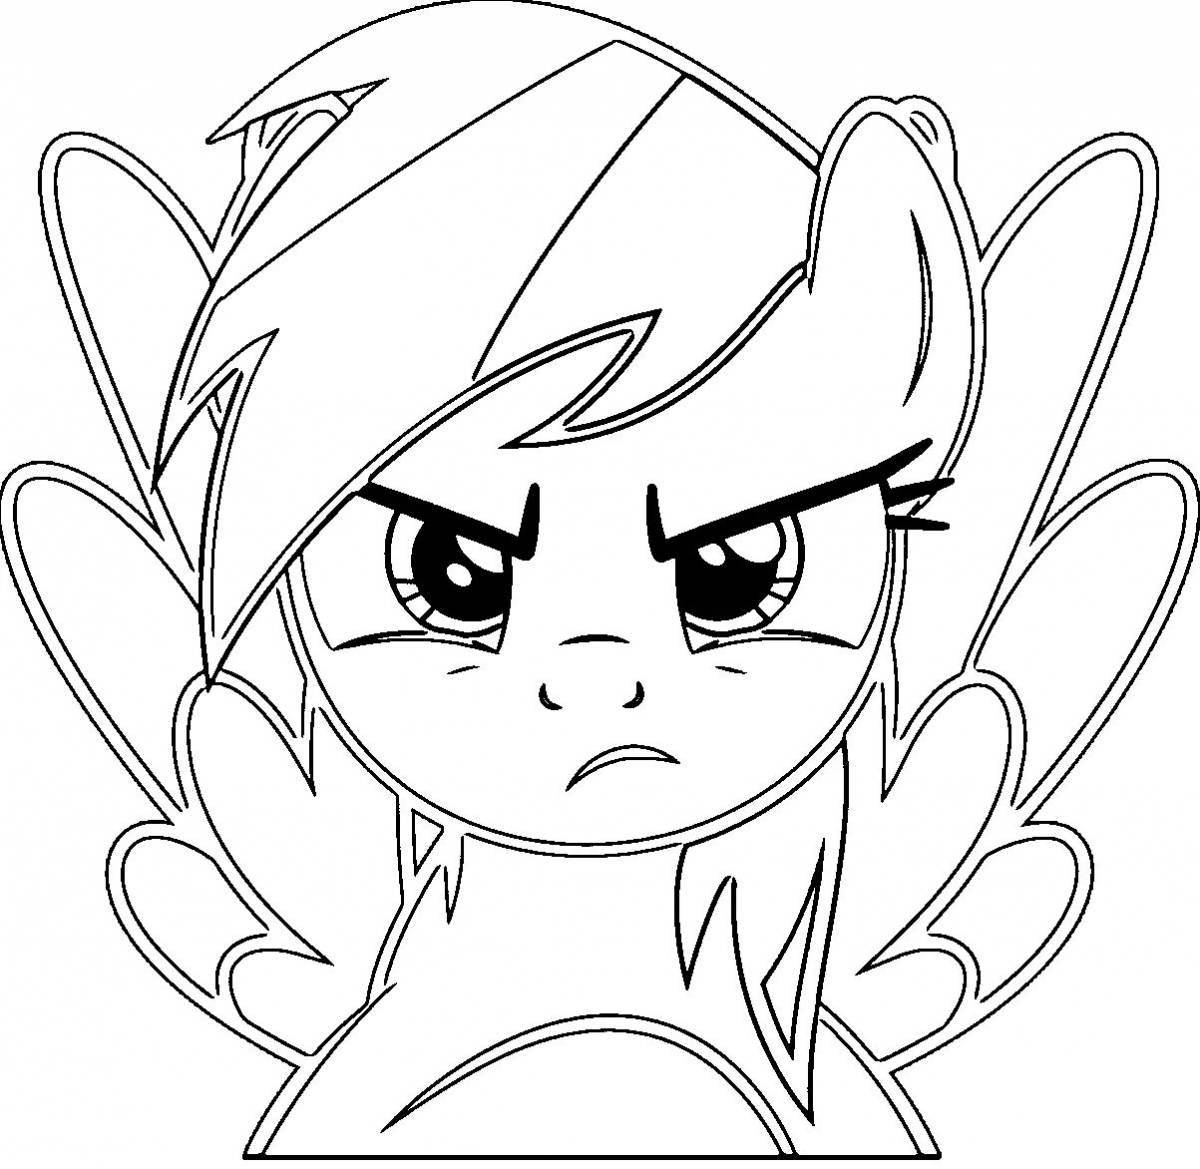 Great rainbow dash coloring page